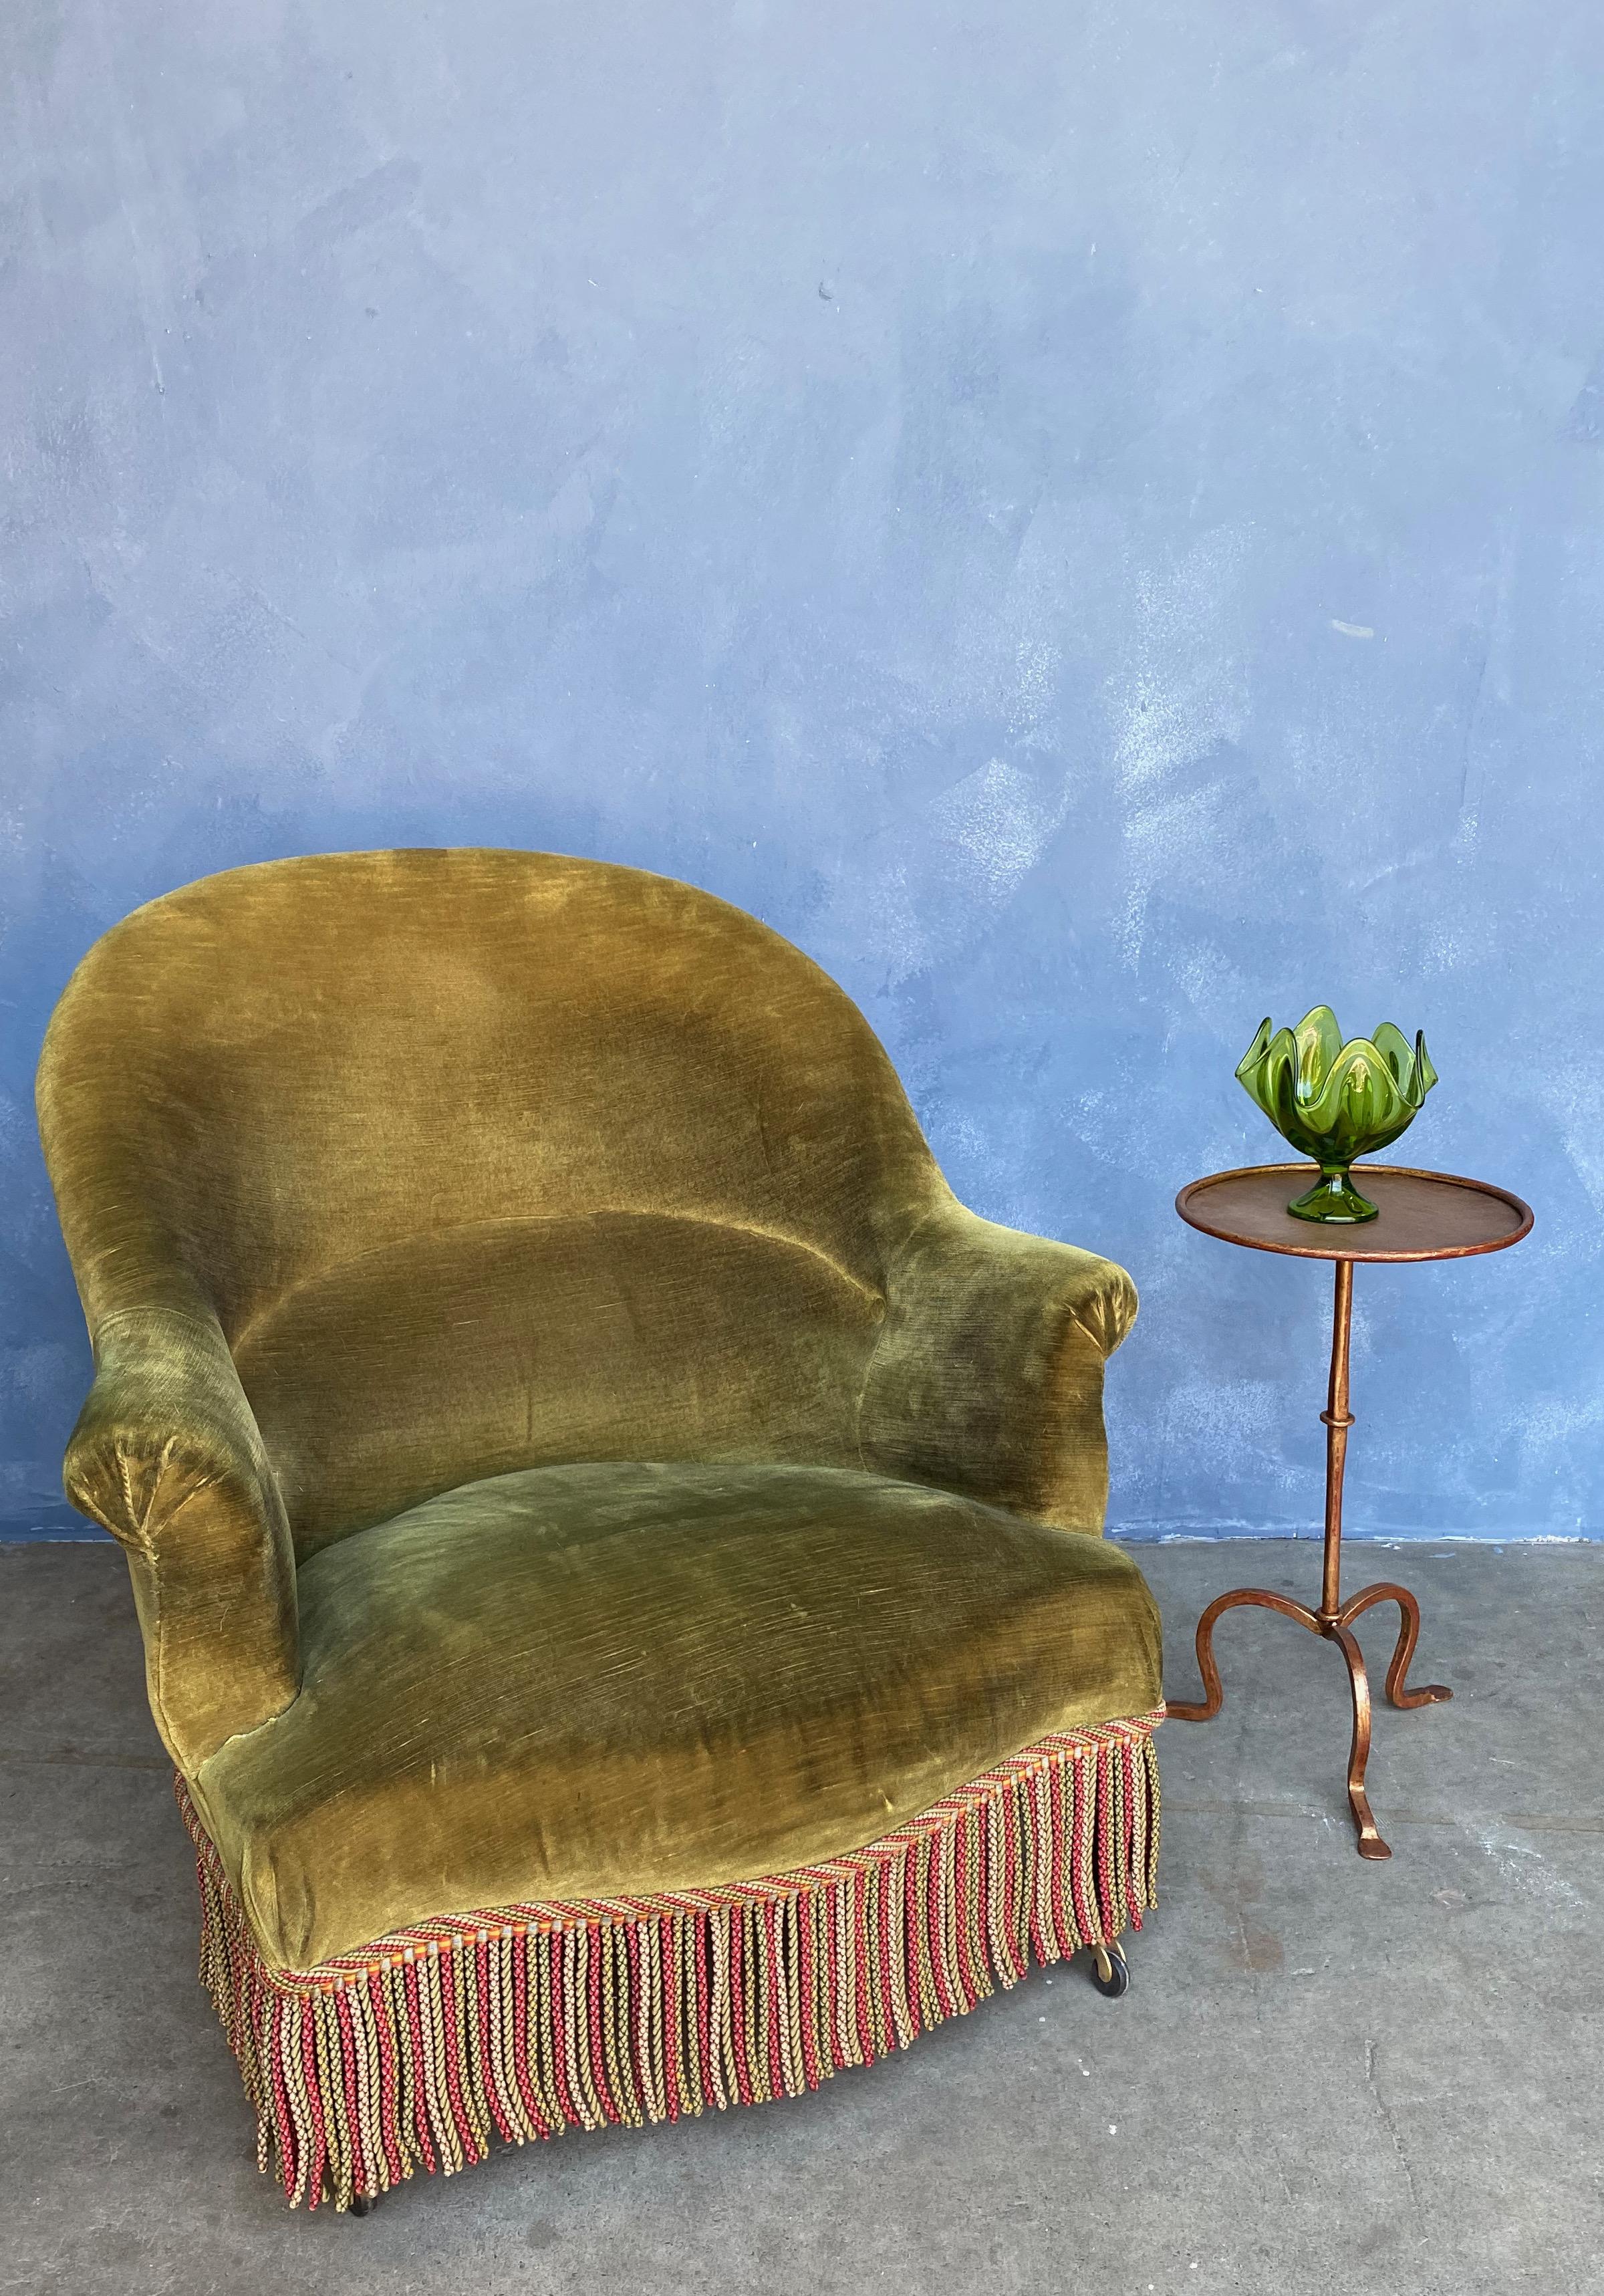 French Napoleon III style armchair in green velvet with bullion fringe. The chair is very comfortable, we have added new casters on the front legs to allow for a relaxed pitch. We have a similar chair that would make for a “faux “ pair, please refer